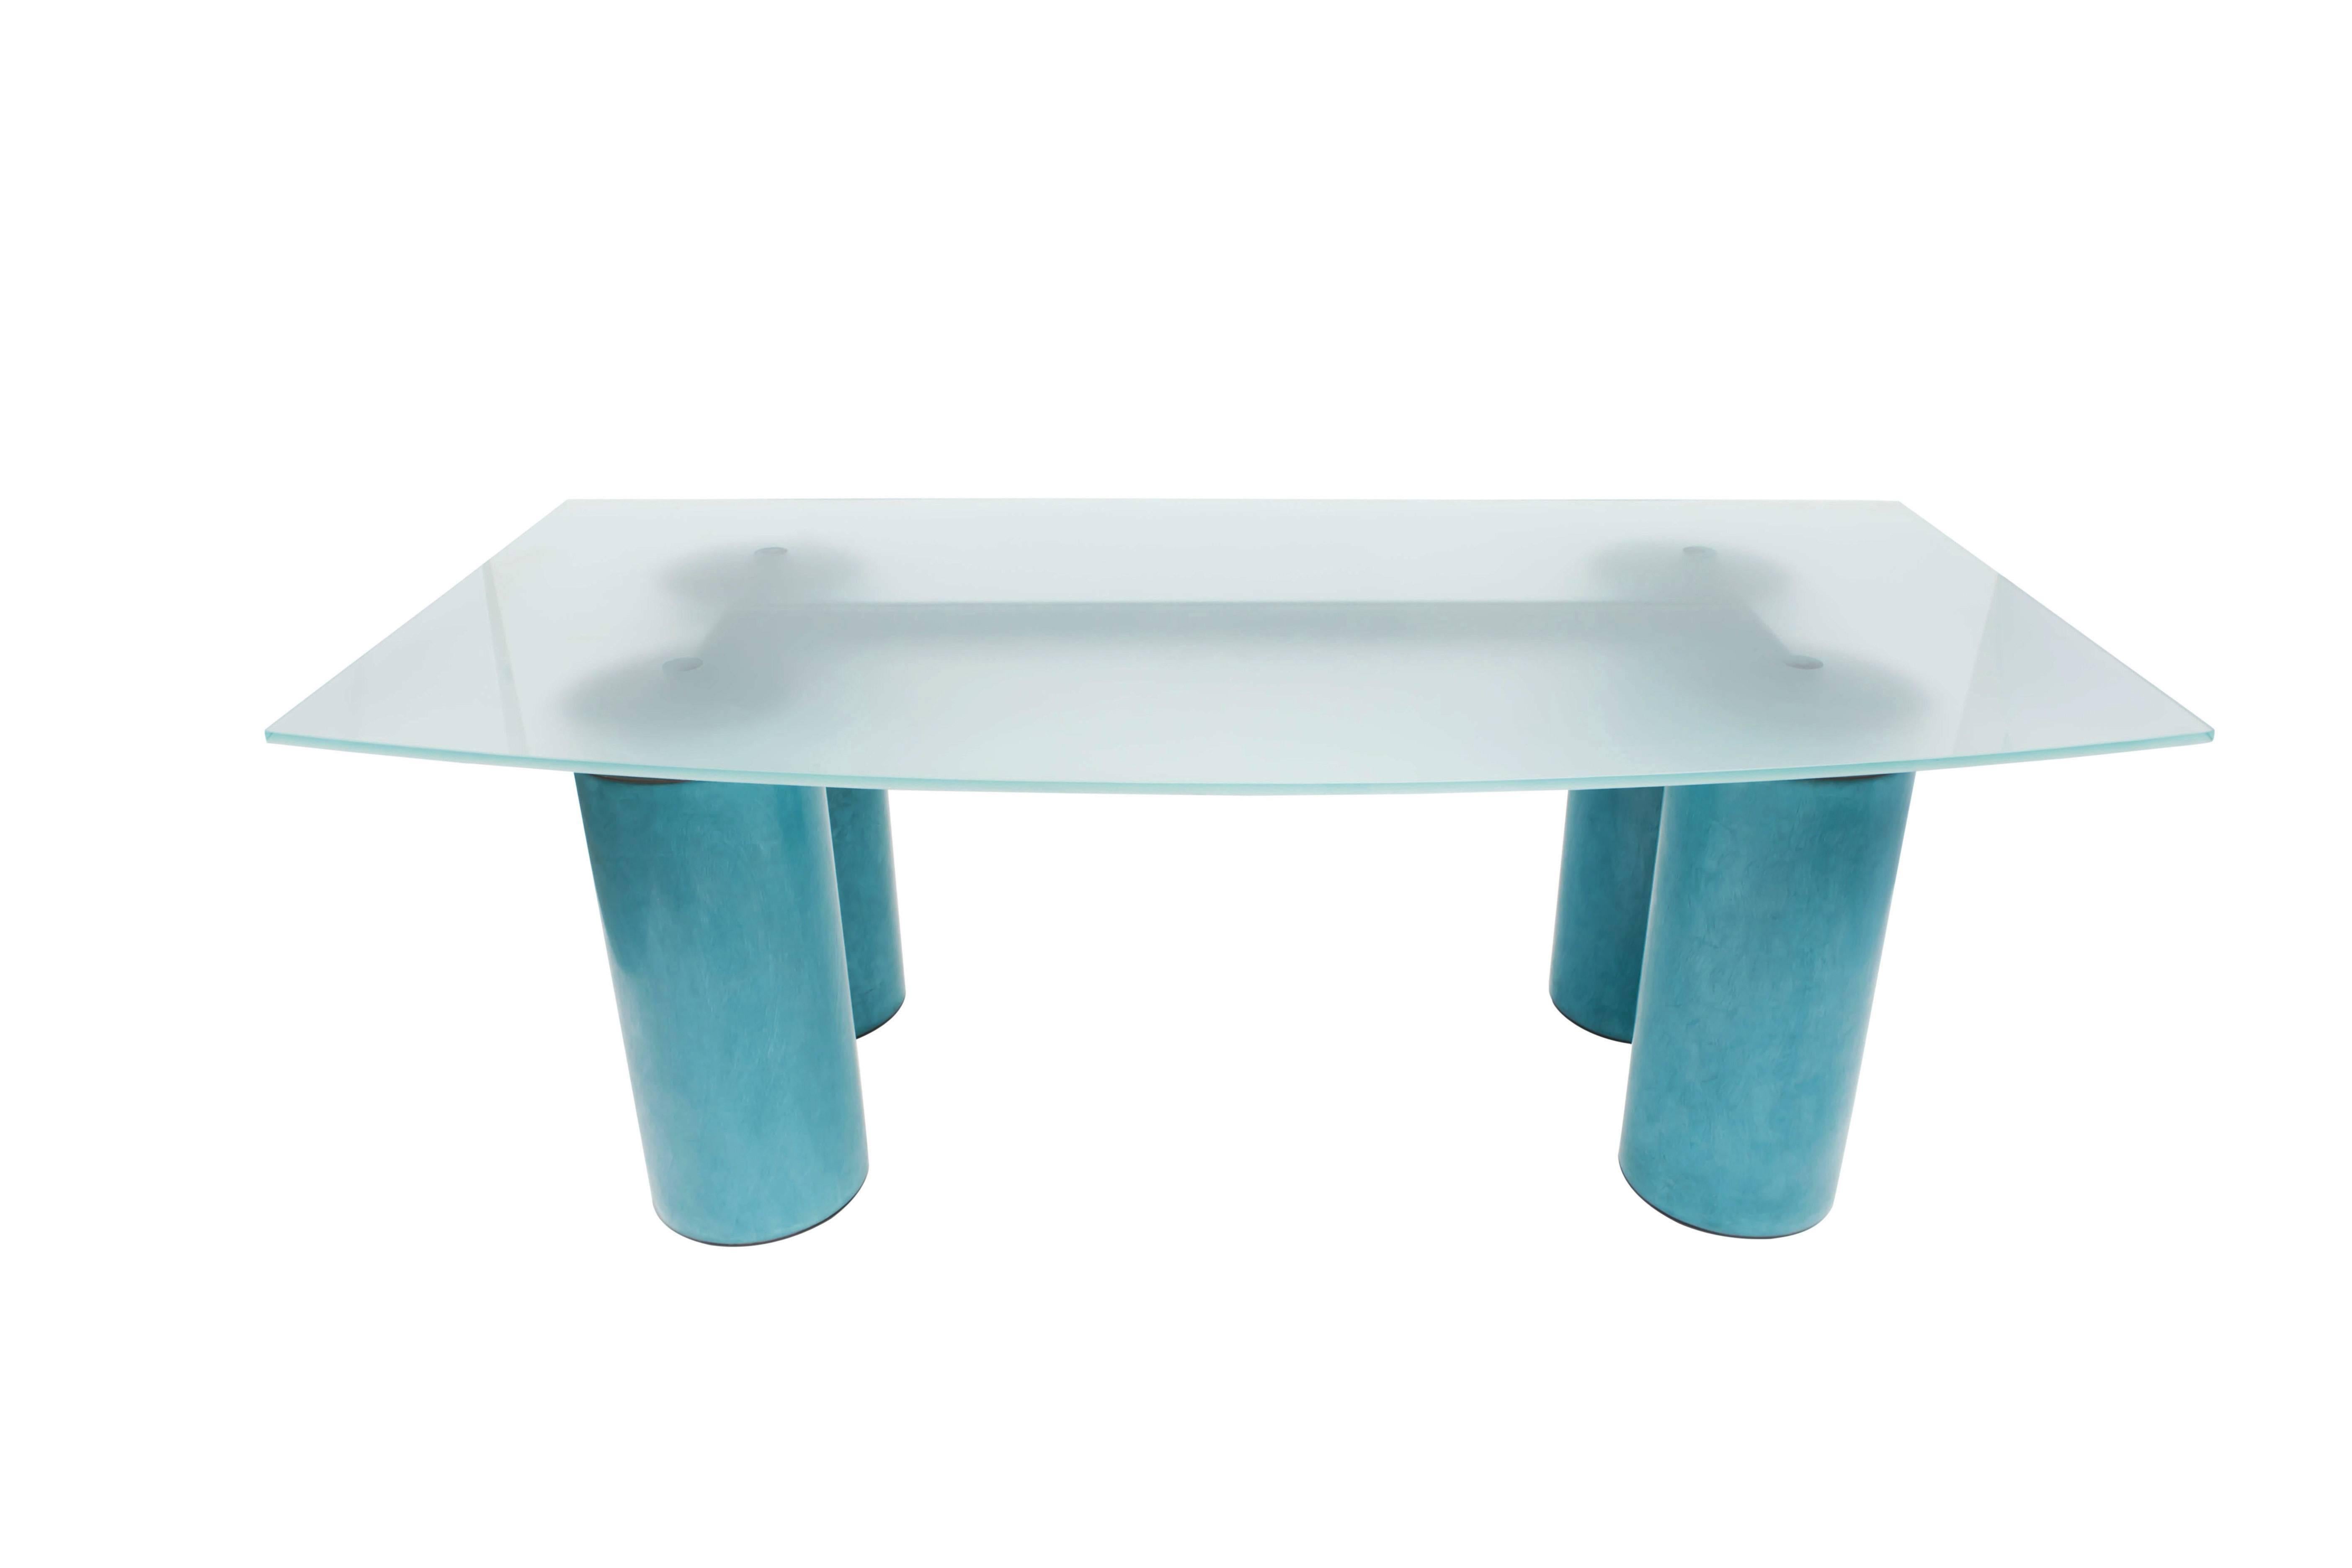 Postmodern memphis style Serenissimo Table Desk by Vignelli for Acerbis (Stahl)